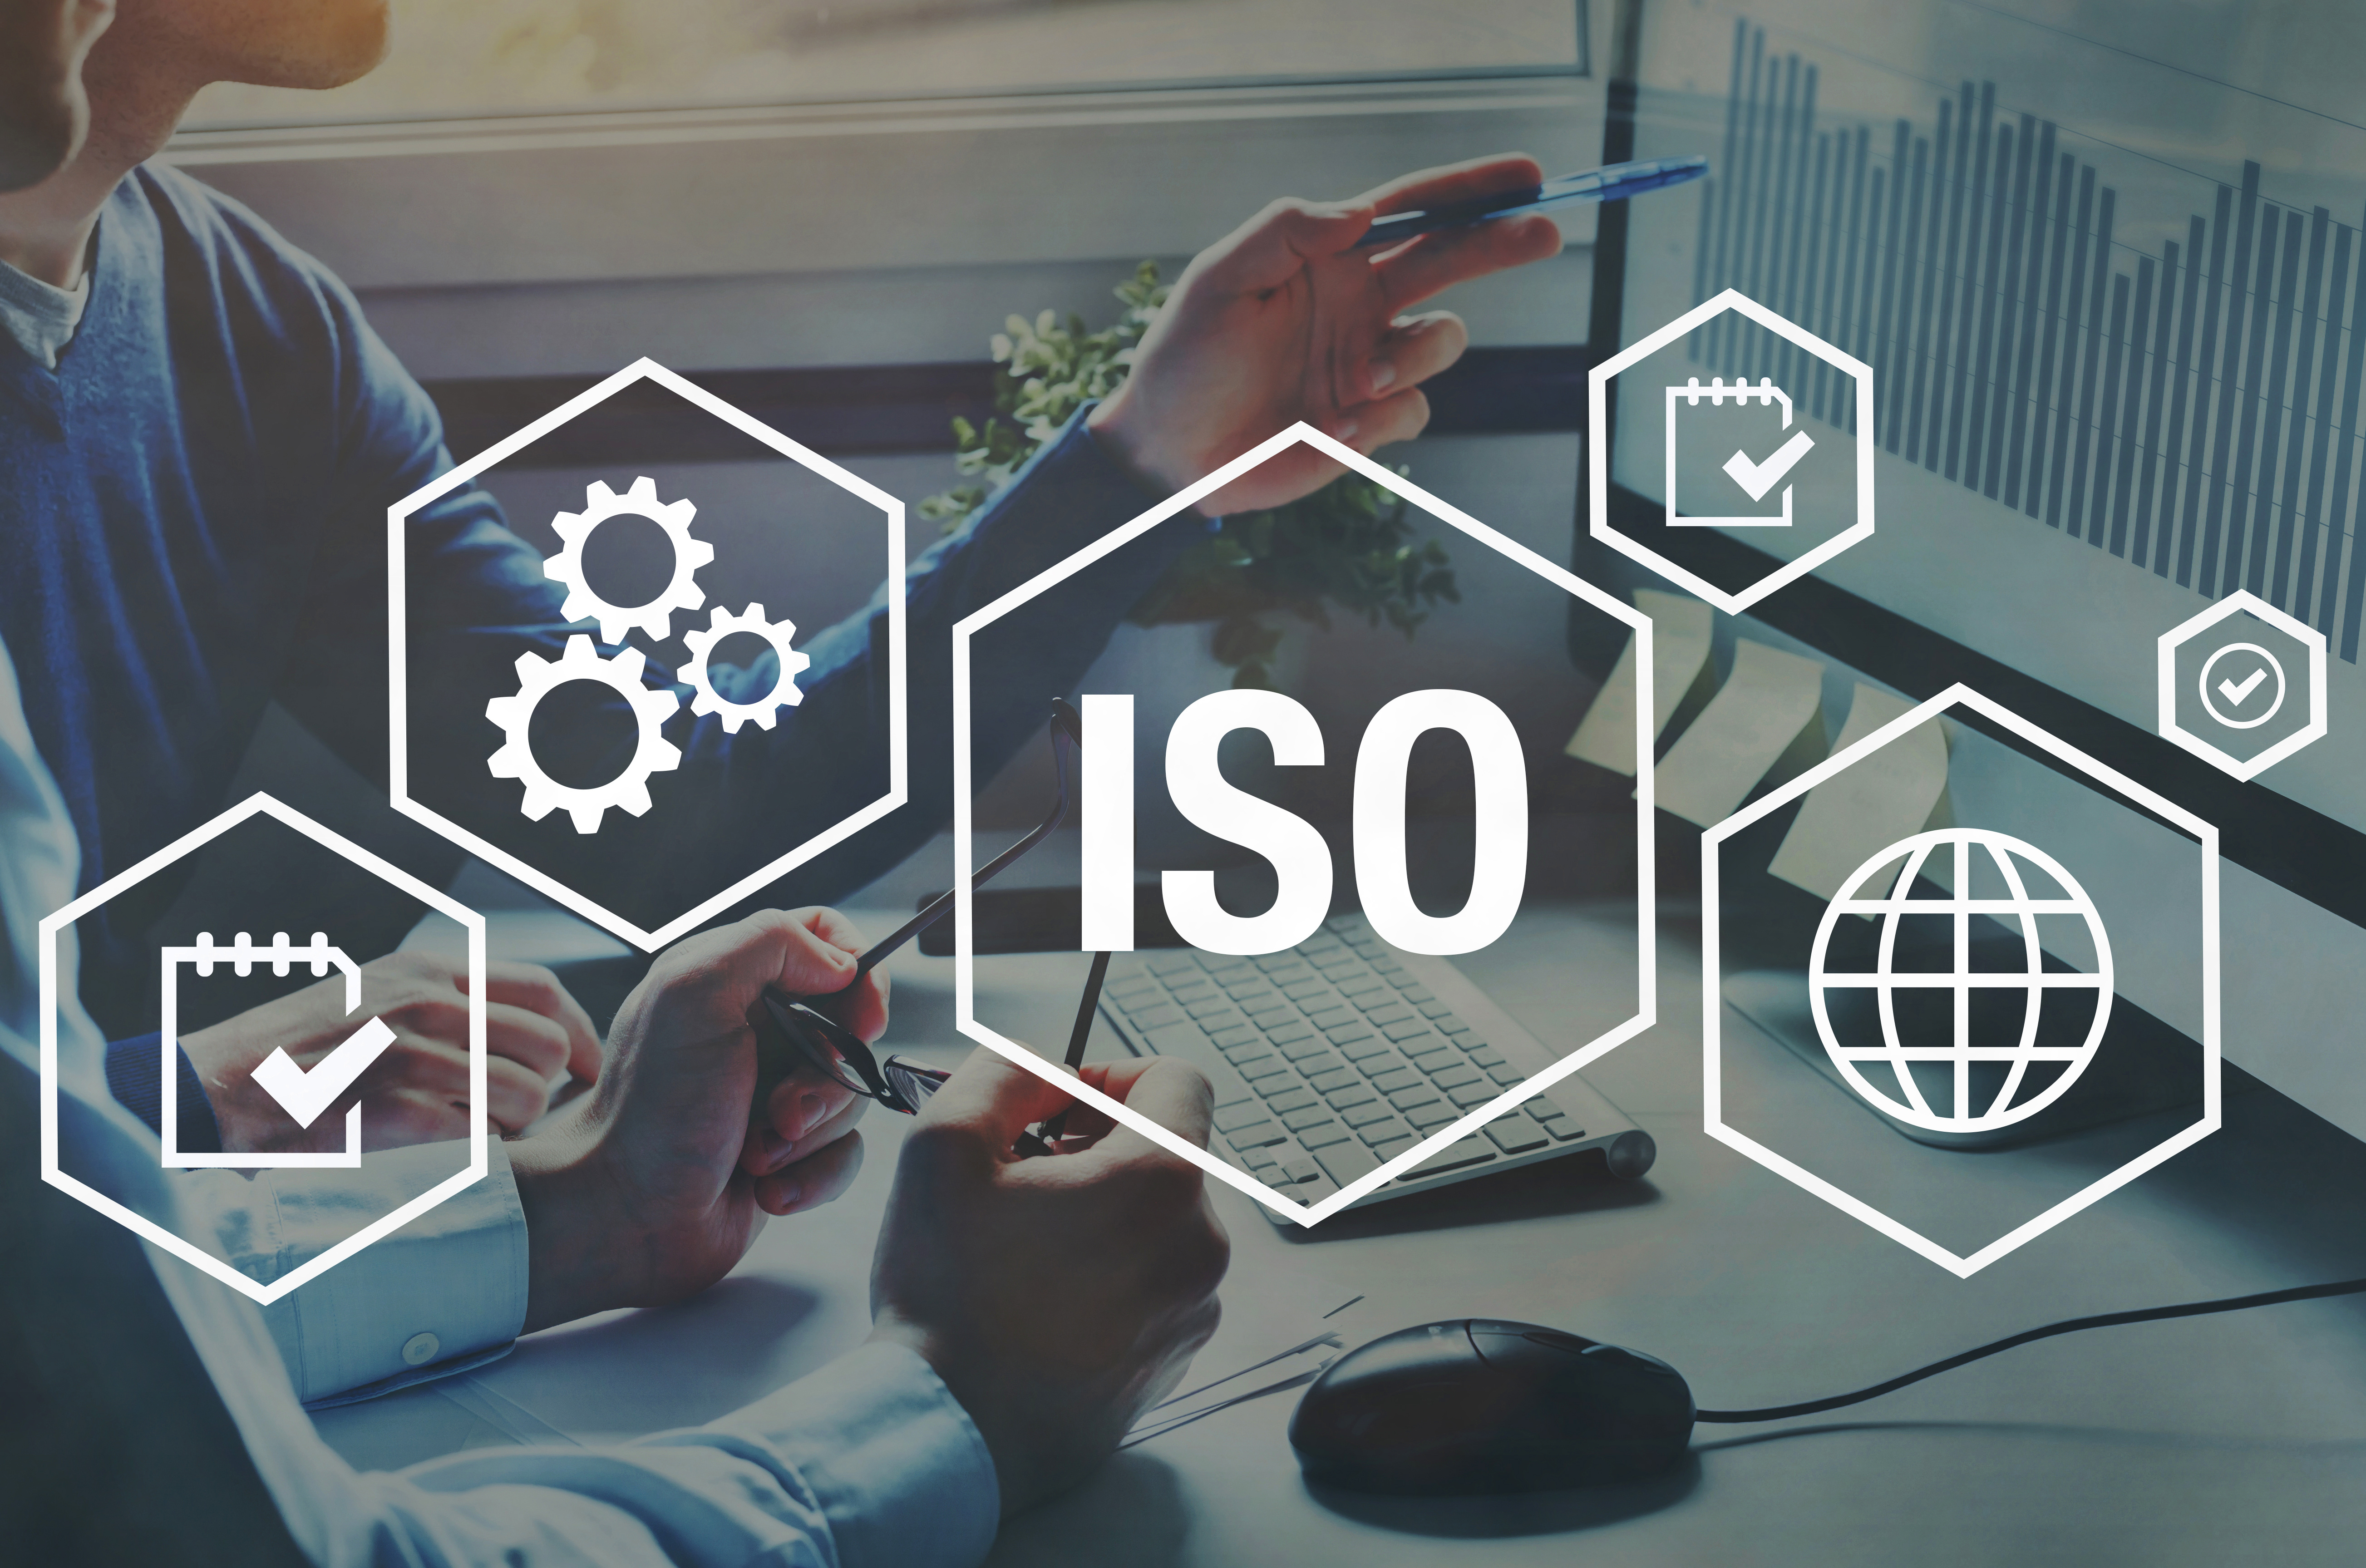 ISO 27001 is the leading international standard focused on information security that was developed to help organizations, of any size or any industry, to protect their information in a systematic and cost-effective way, through the adoption of an Information Security Management System.